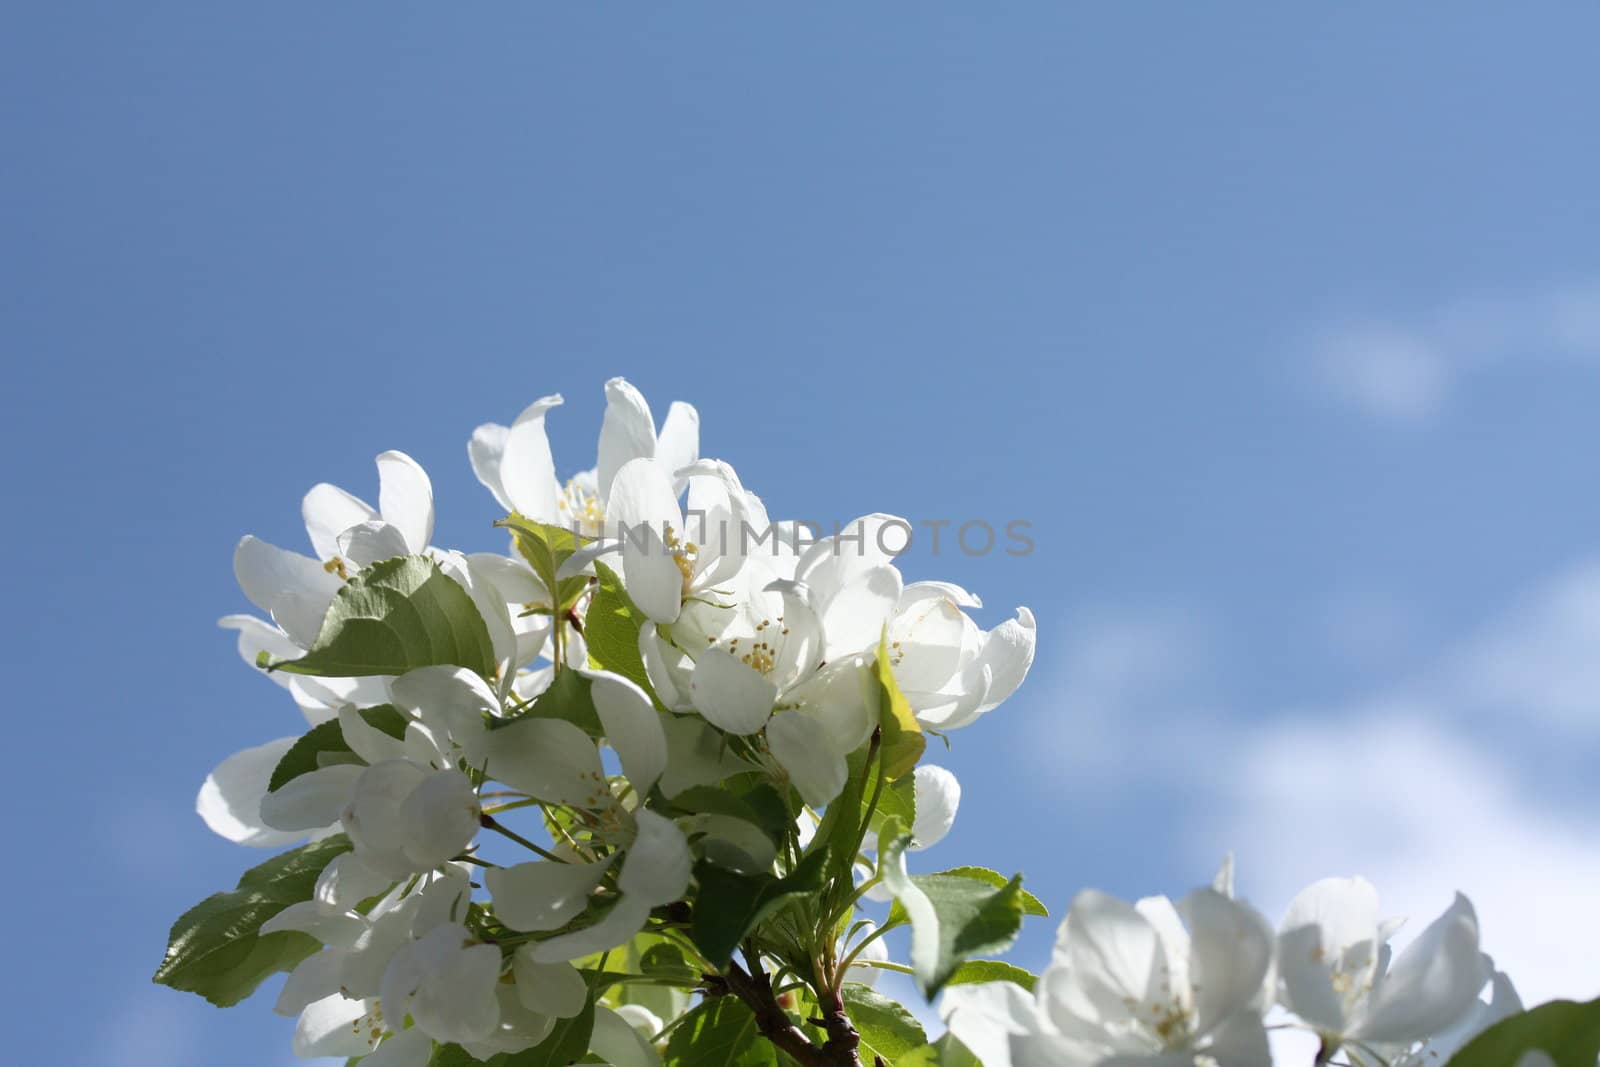 Apple Blossoms on a branch against a blue sky